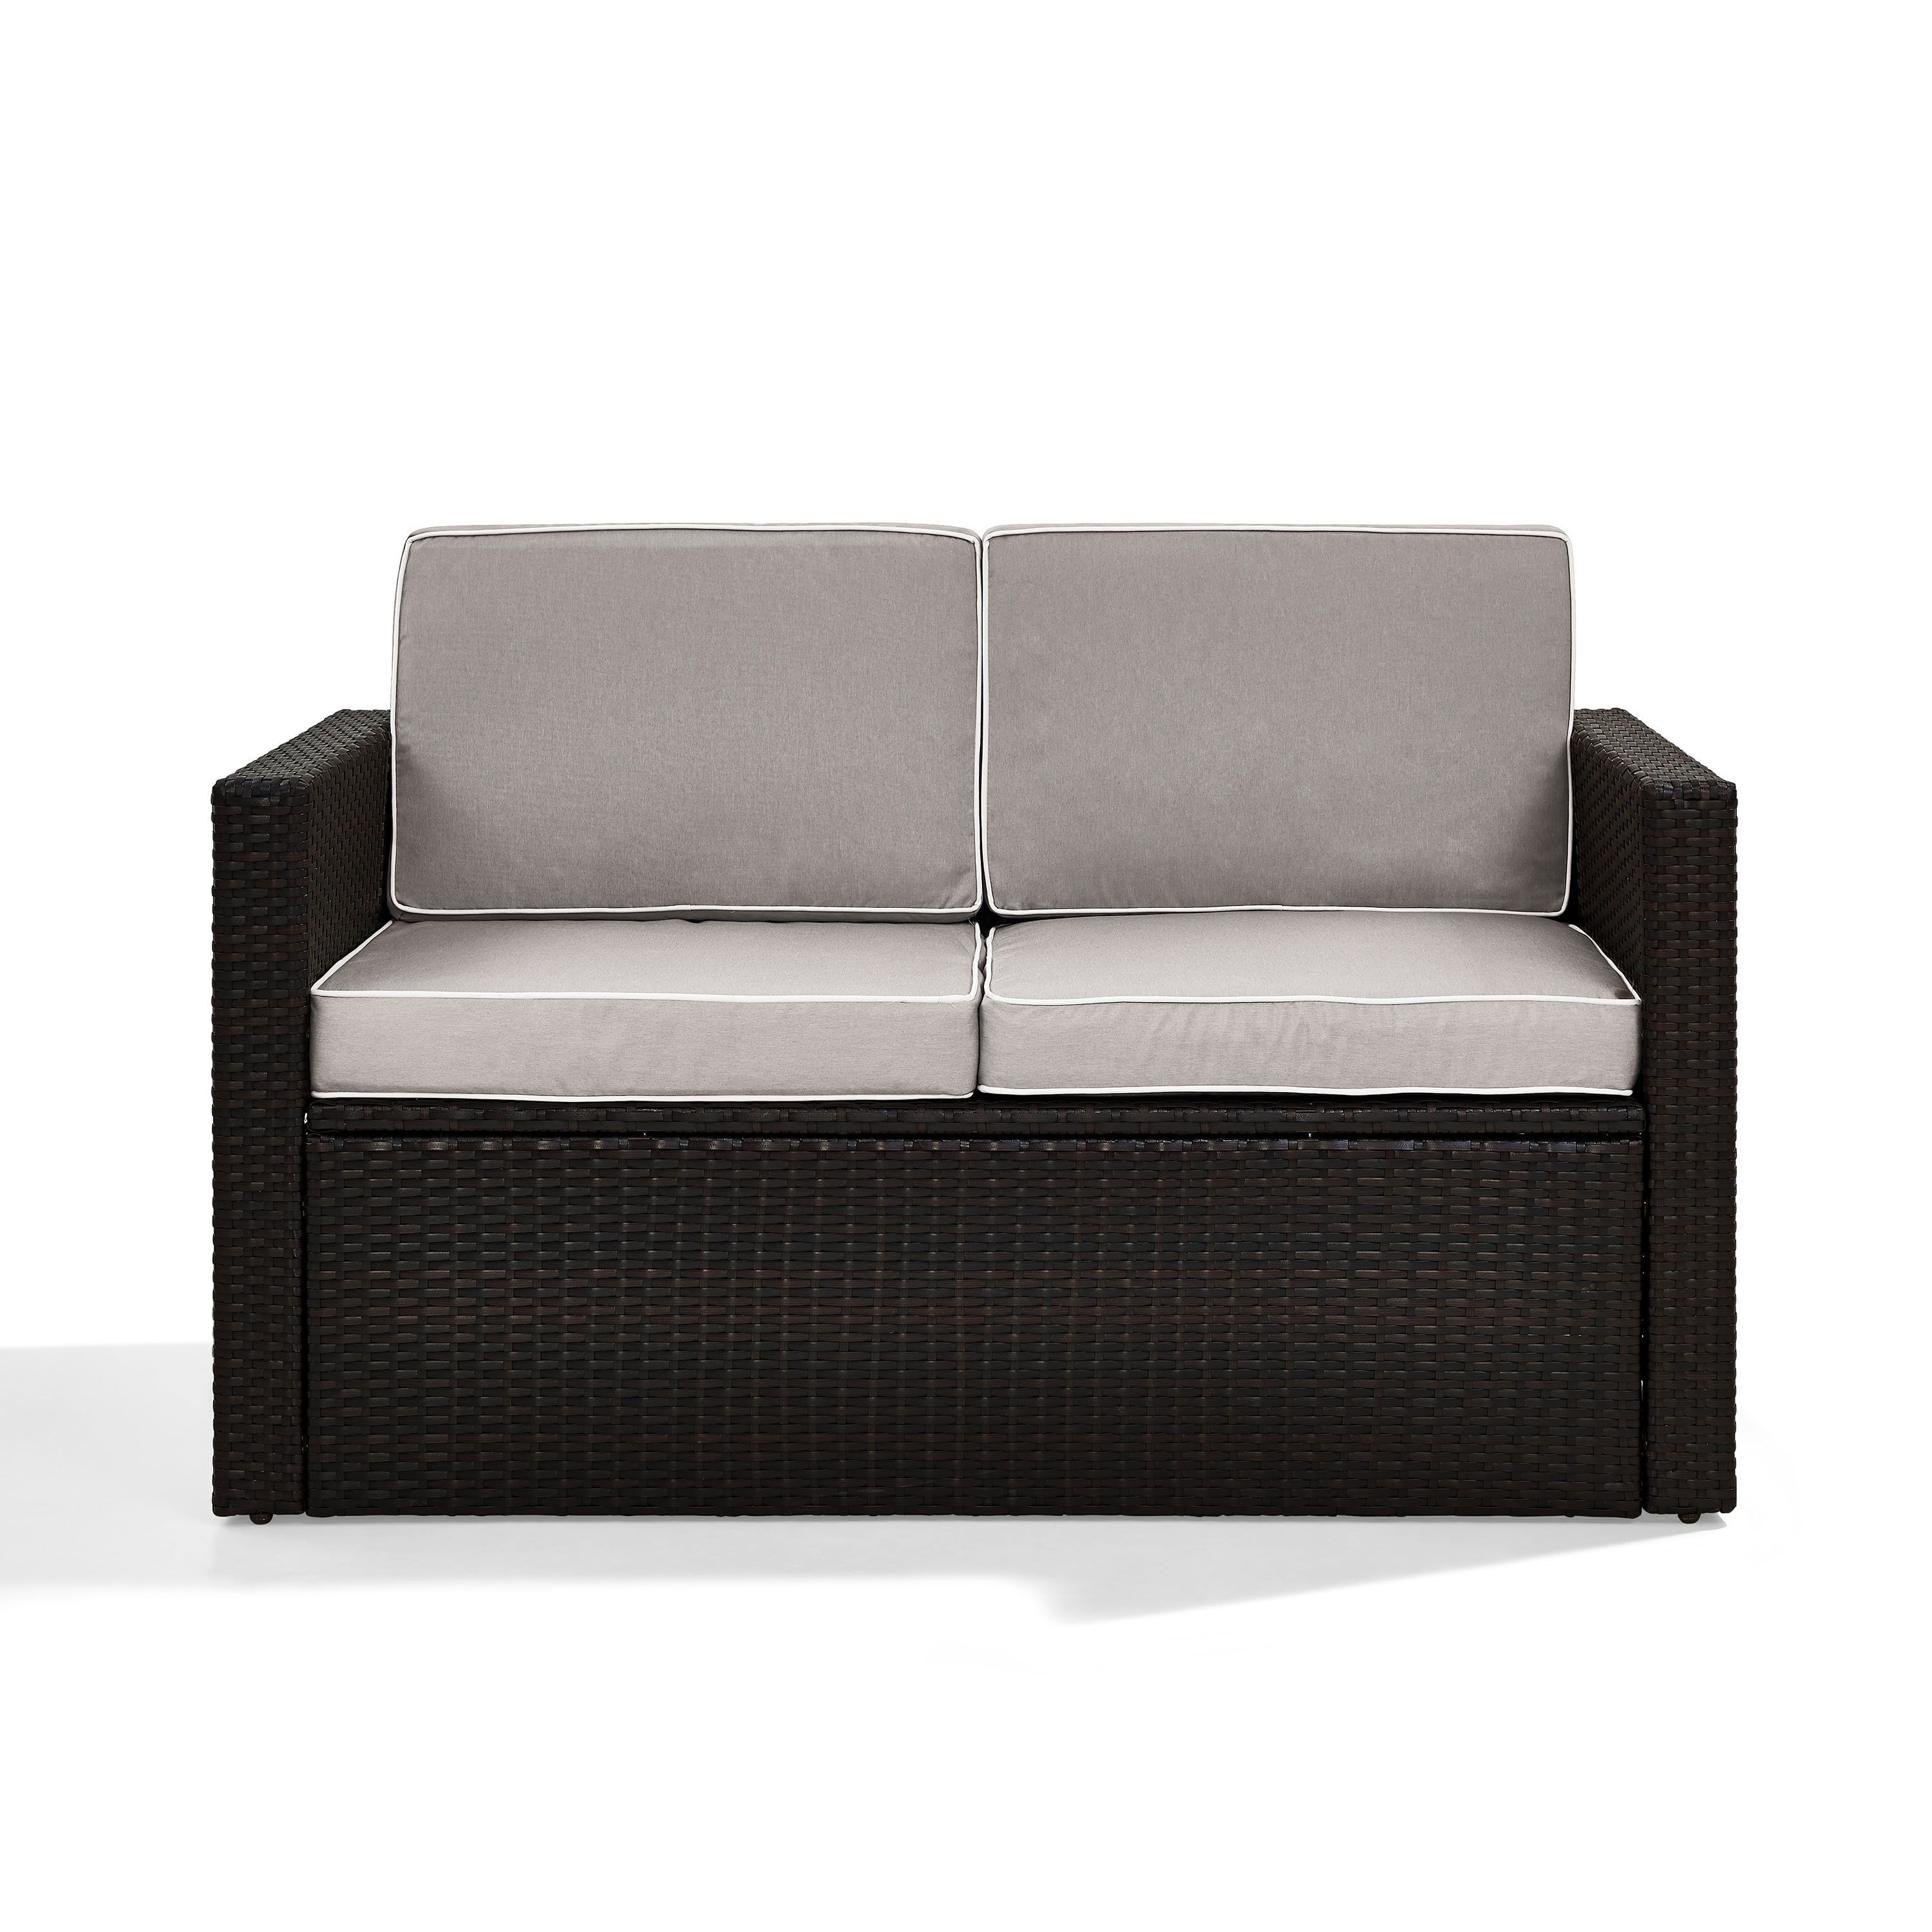 Belton Loveseat With Cushions Pertaining To 2019 Belton Loveseats With Cushions (View 2 of 25)